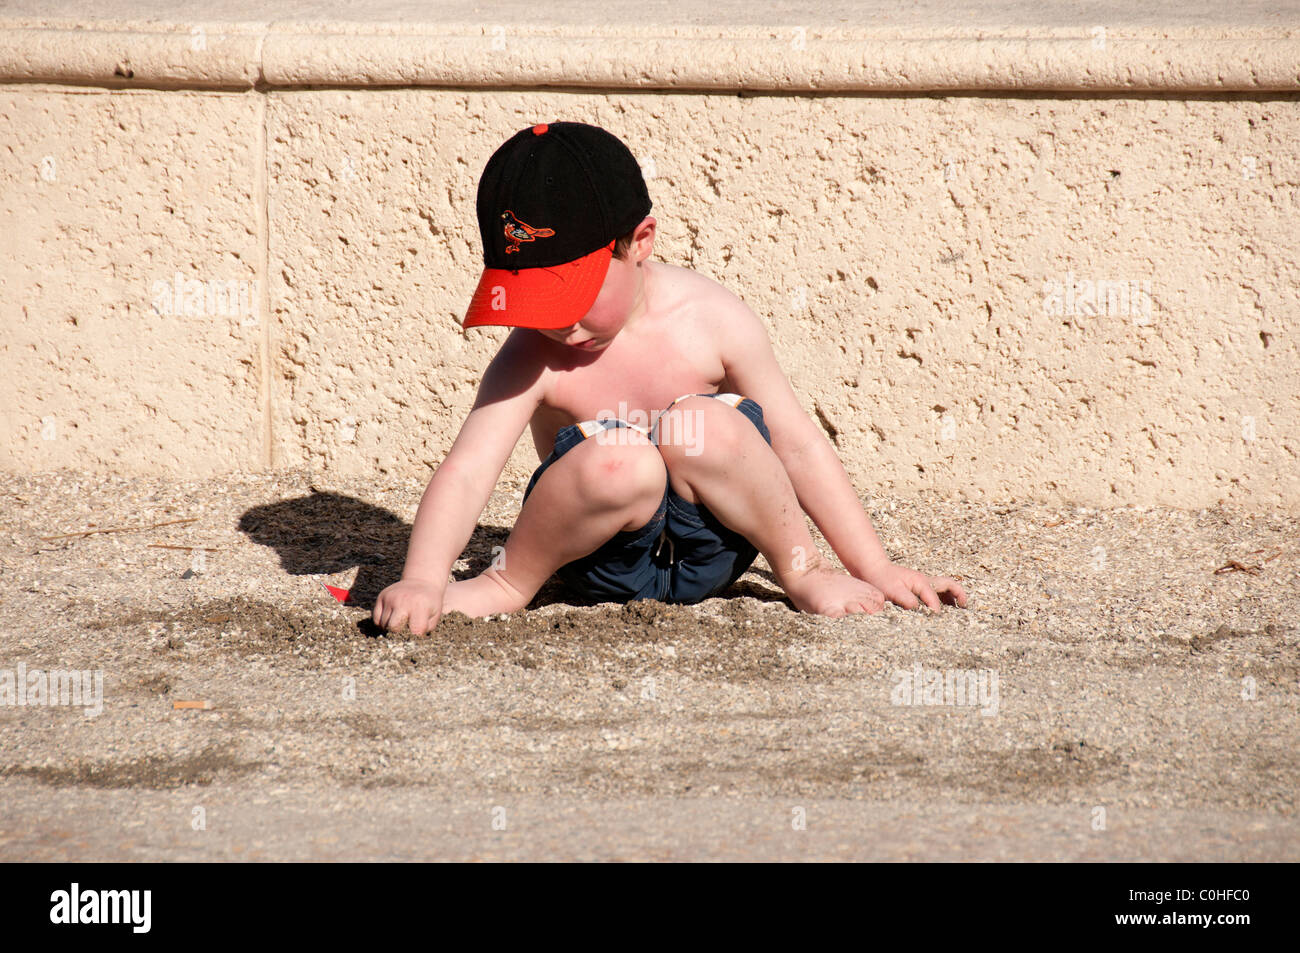 Little boy playing in sand. Stock Photo